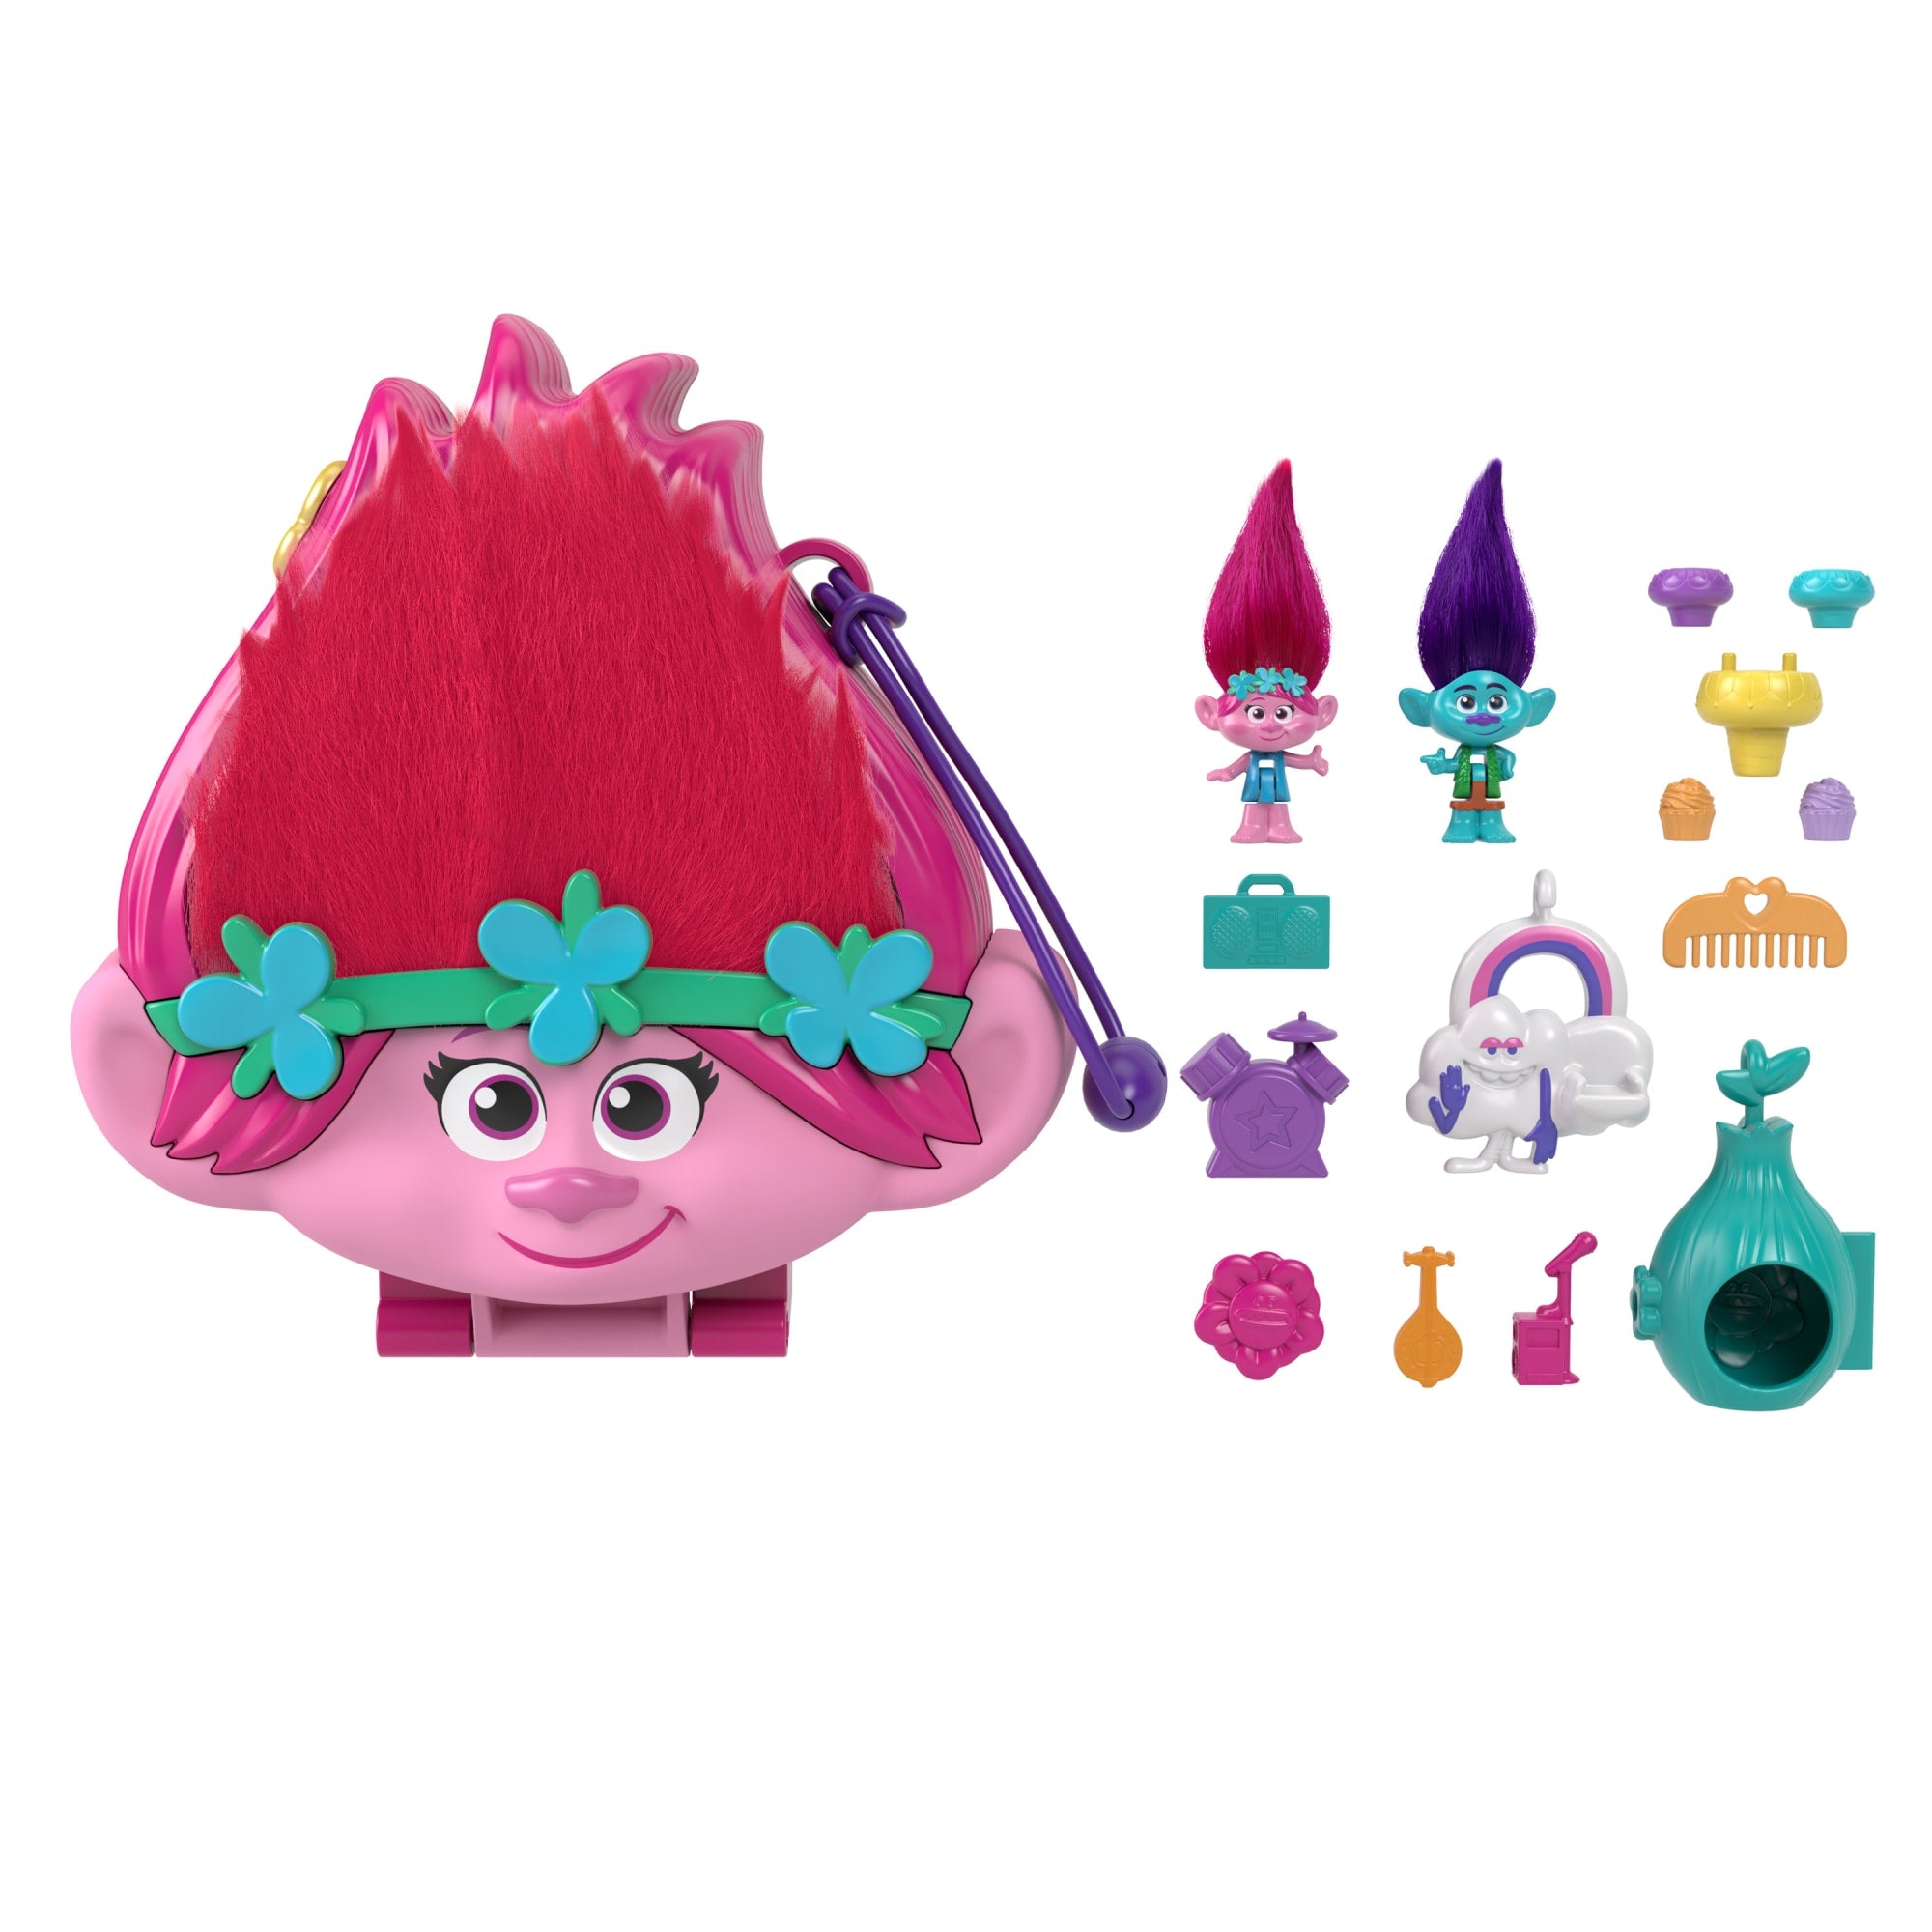 Polly Pocket Playset | DreamWorks Trolls Compact with 2 Dolls